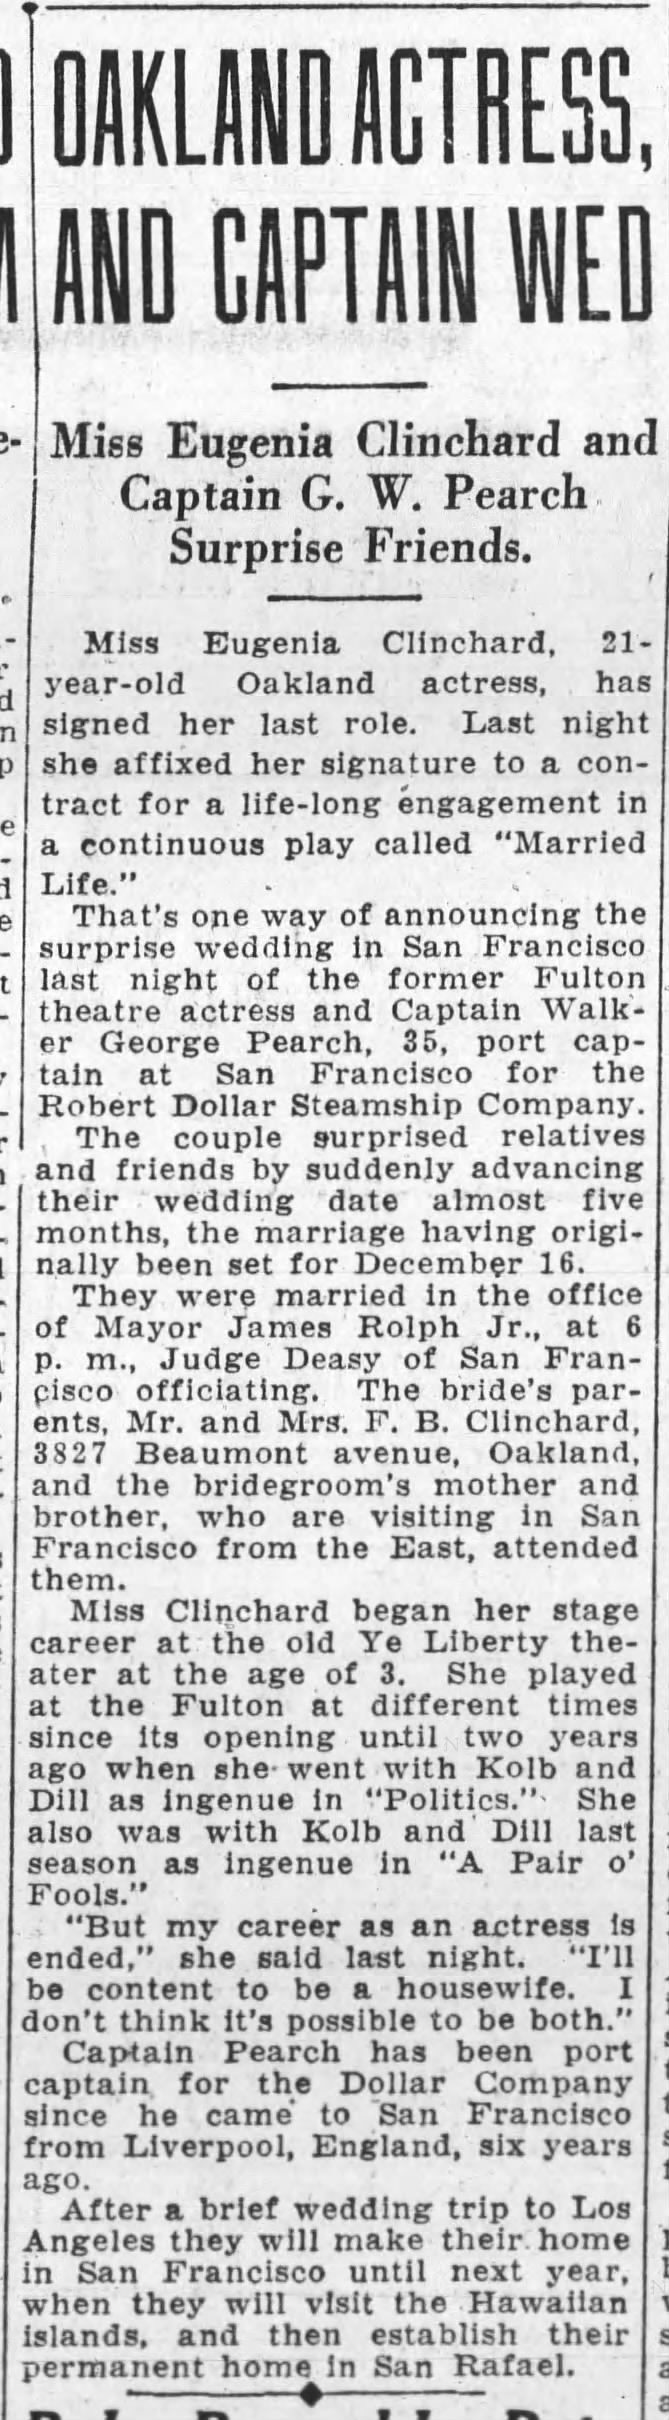 Oakland actress, and captain wed